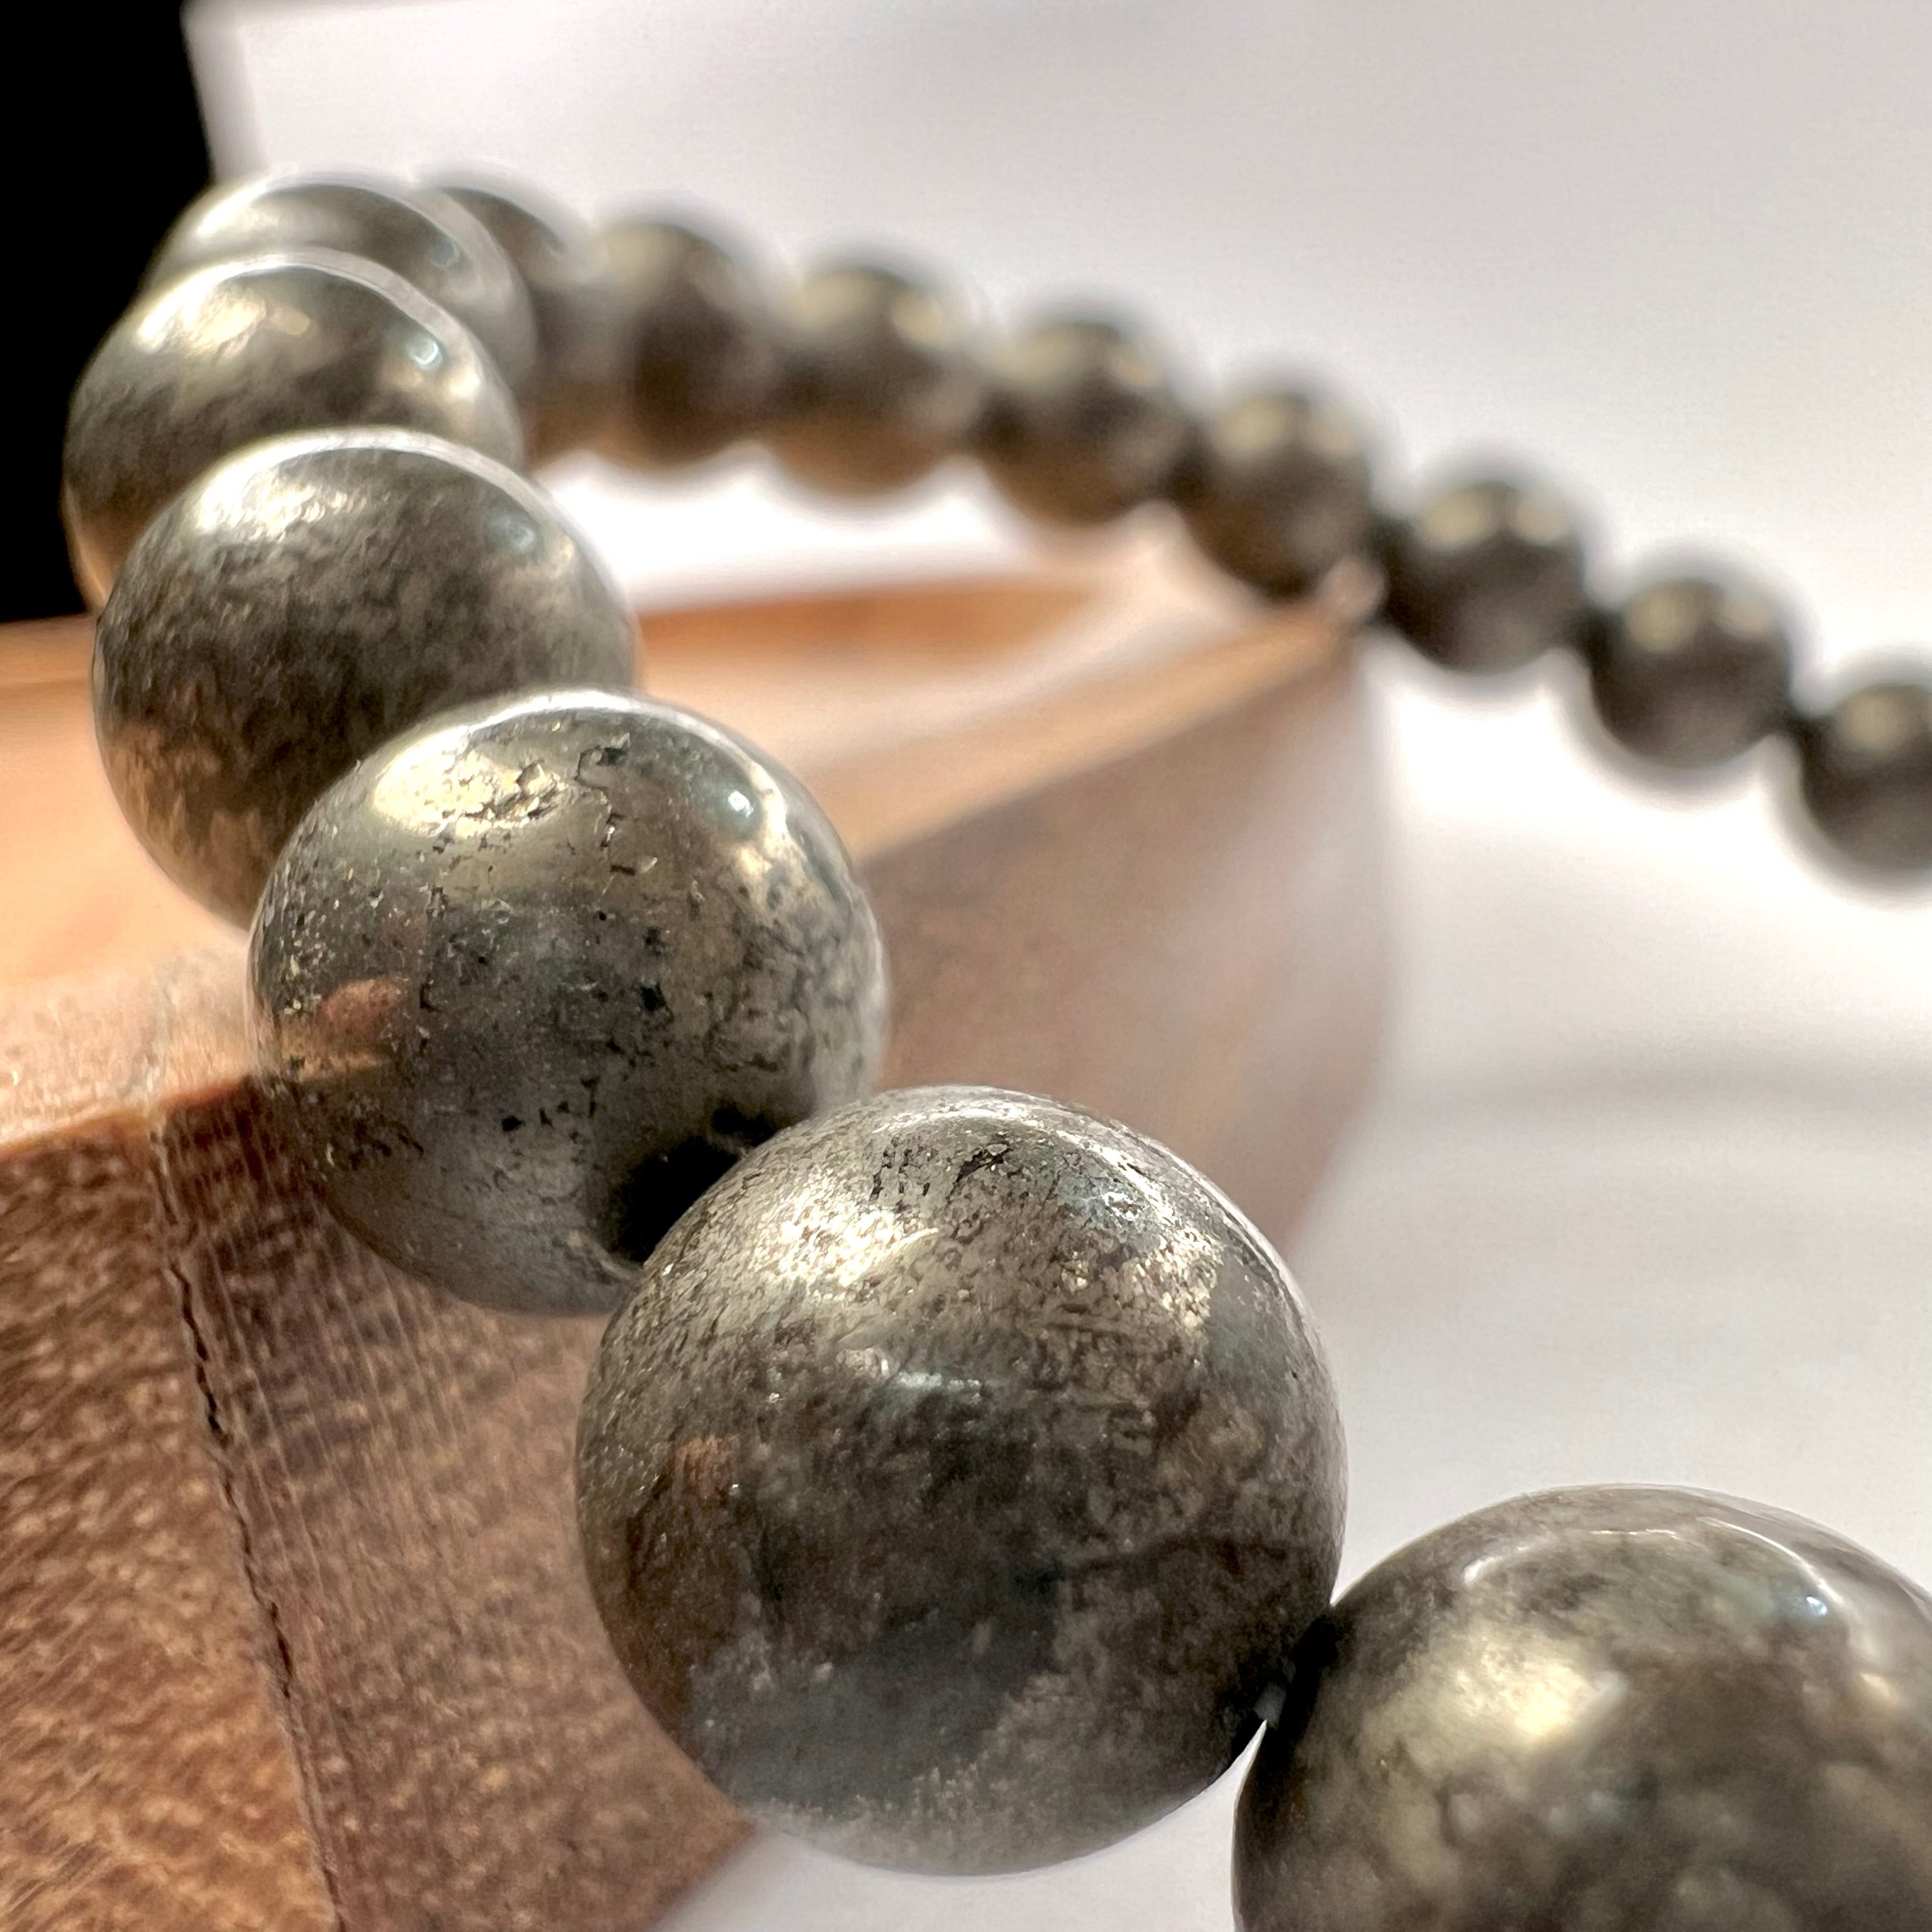 ￼PYRITE BRACELET - MONEY MAGNET AND CONFIDENCE BOOSTER